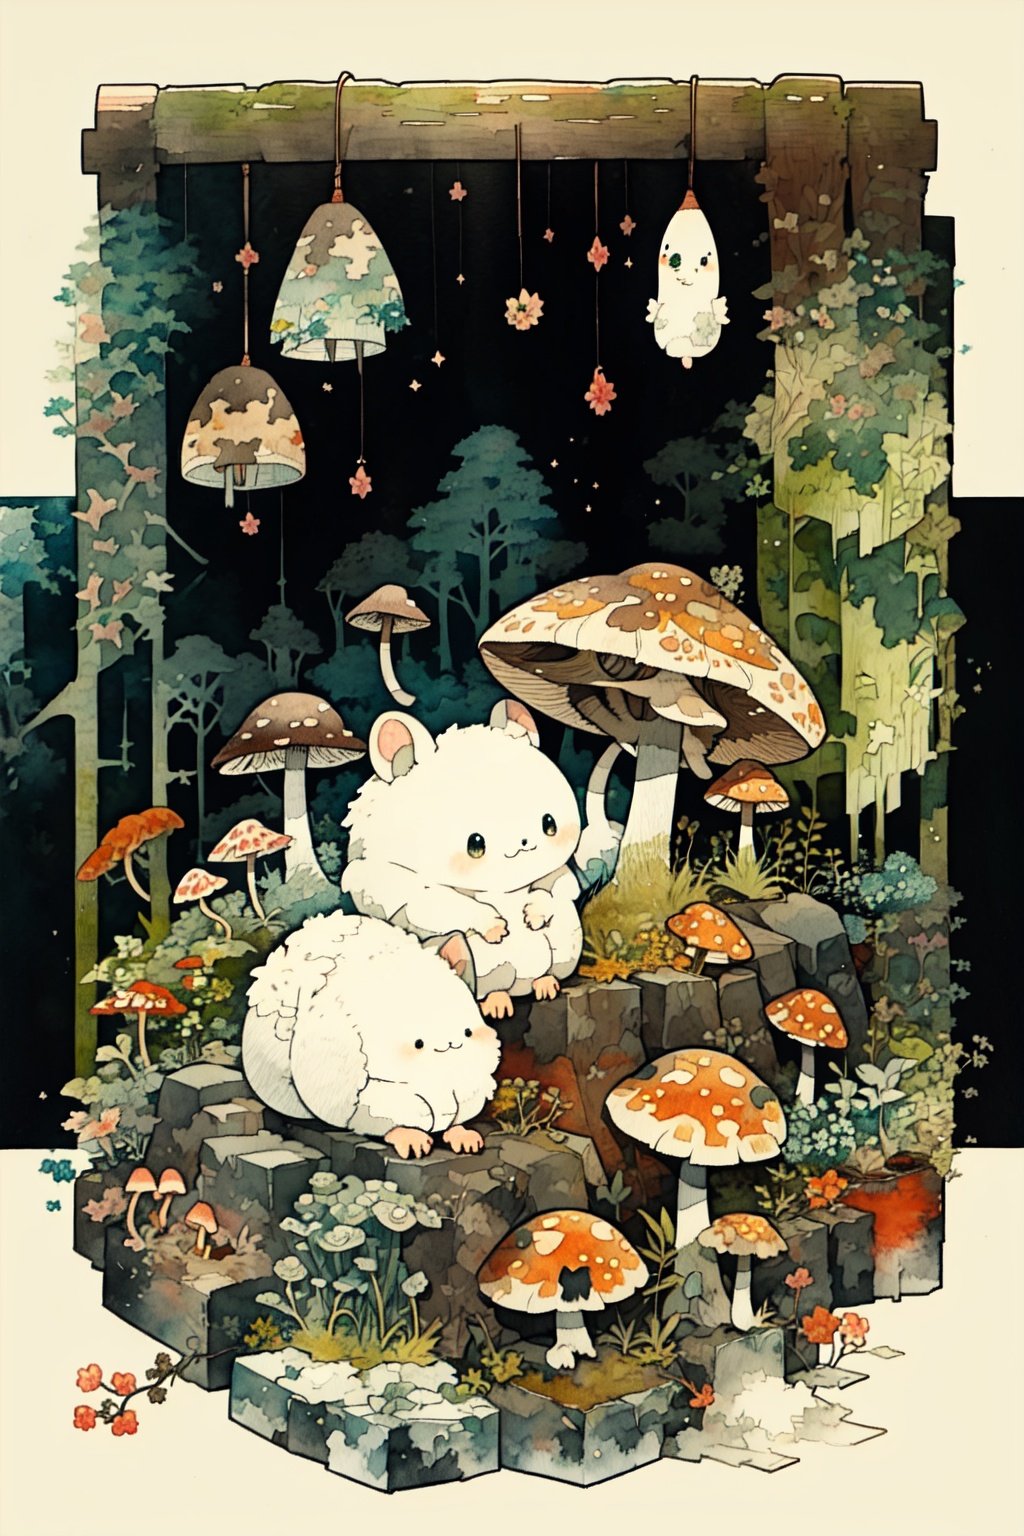 style of David Mattingly, a cute small fluffy mammal dragon, nature themed, moss, mushrooms, Illustration, Character Design, Watercolor, Ink, thematic background, japan, ambient enviroment, epic, candystyle